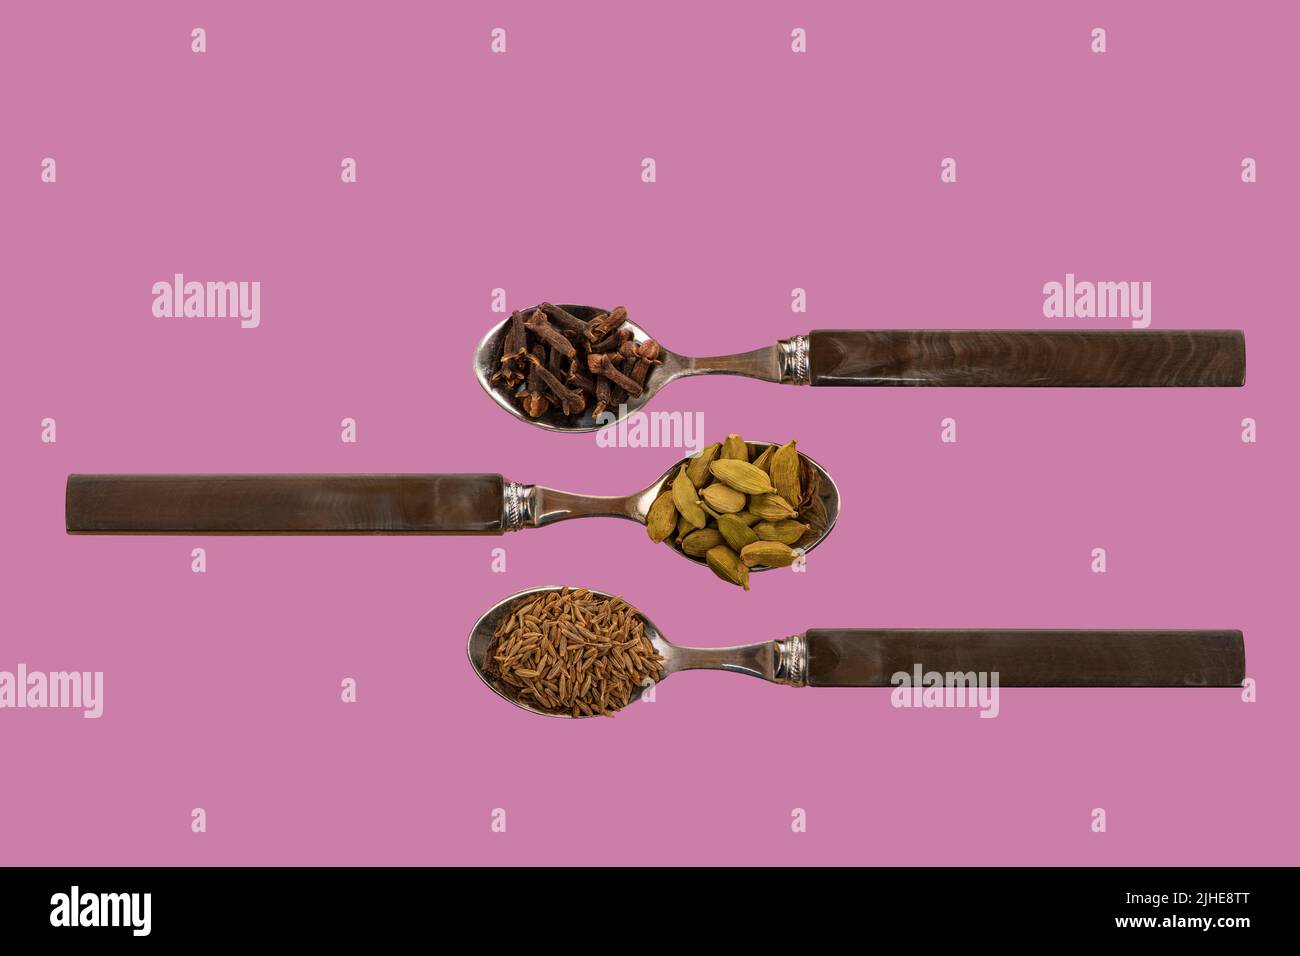 selection assorted indian spices cumin seeds cardamom cardamon pods cloves display on spoons on a colorful colourful pink lavender background Stock Photo